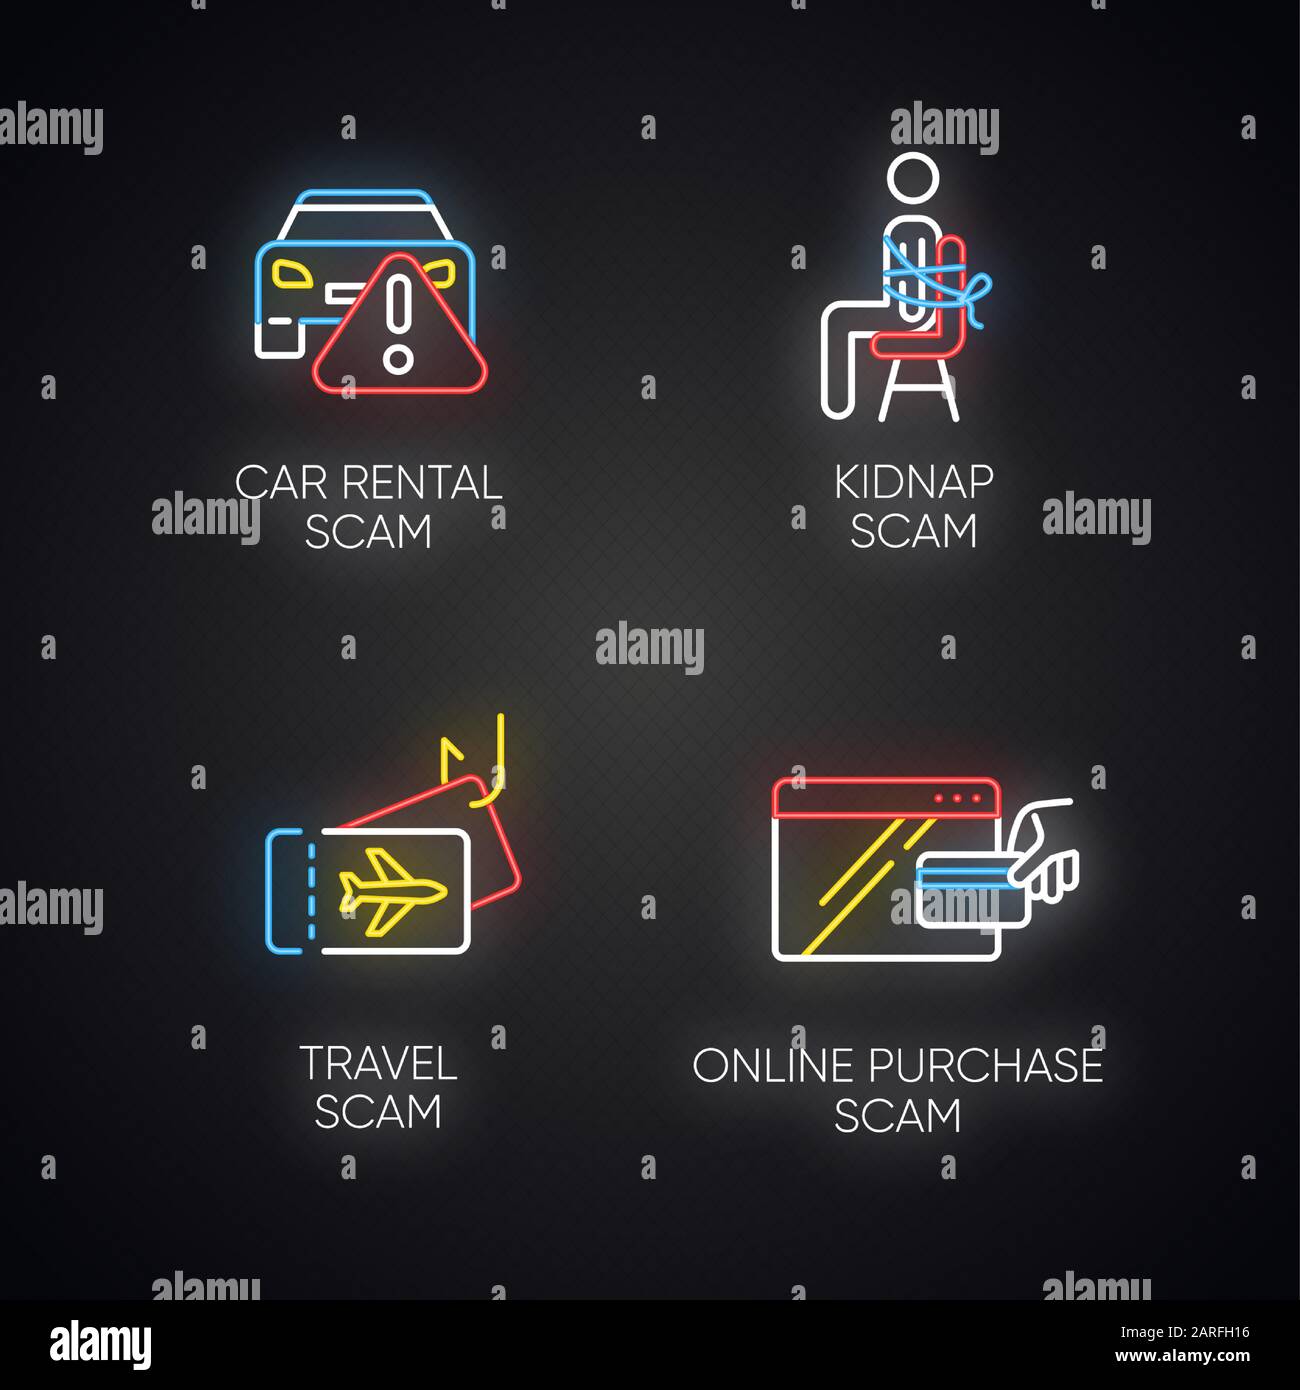 Scam types neon light icons set. Car rental, online purchase fraudulent scheme. Kidnap, travel trick. Cybercrime. Financial scamming. Illegal money ga Stock Vector